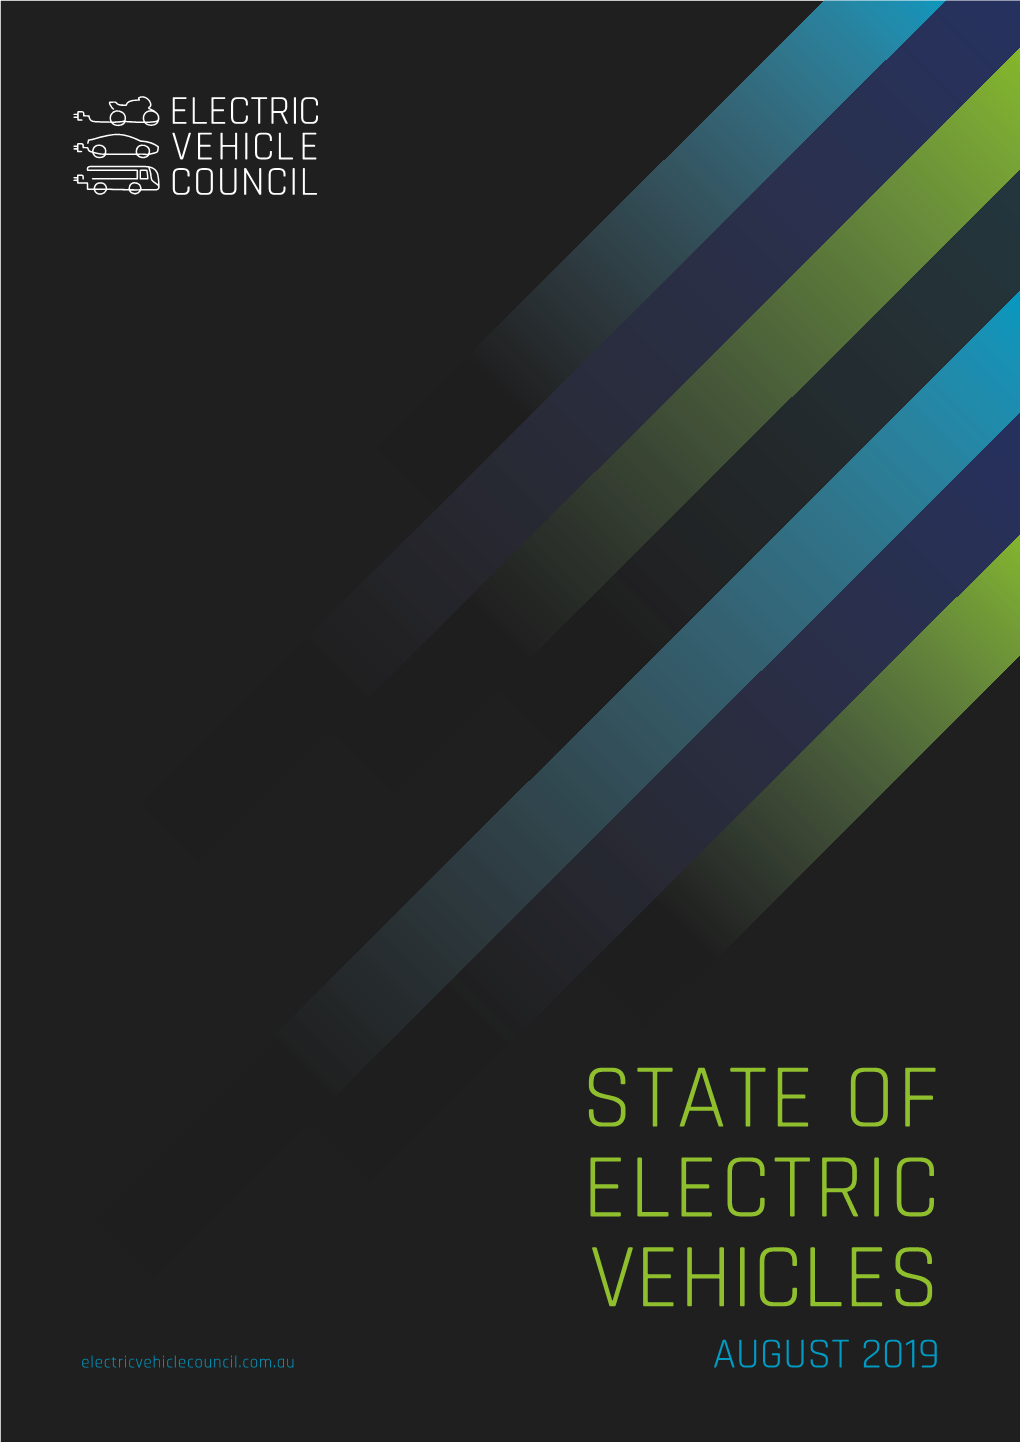 Electric Vehicle Council – the National Peak Body Representing the Electric Vehicle Industry in Australia